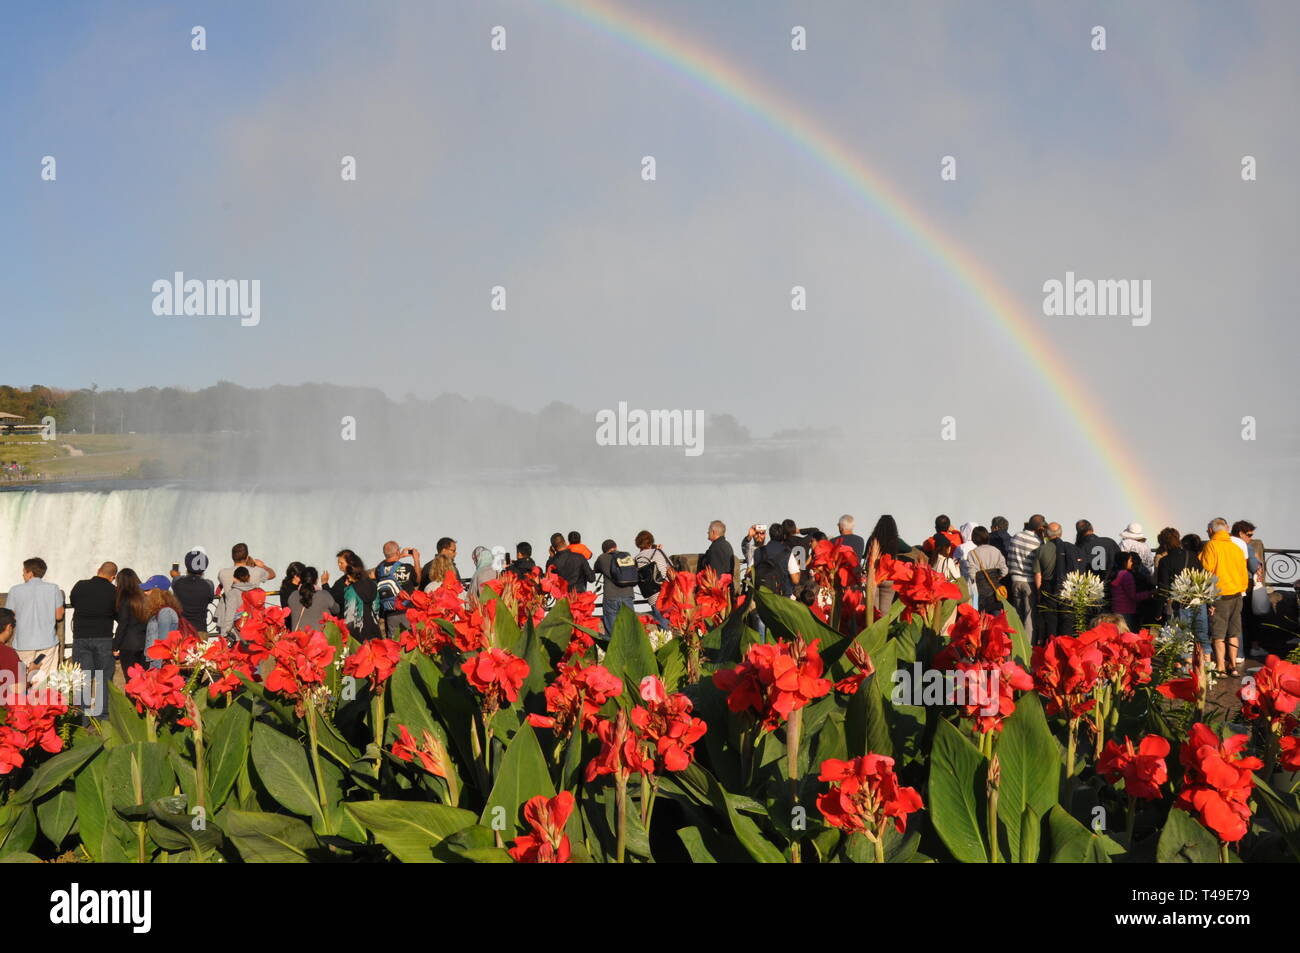 Niagara Falls, Canada - September 10, 2018 - Rainbow of People and Canni Lilies at Table Rock Viewing Horseshoe Falls - Editorial Stock Photo